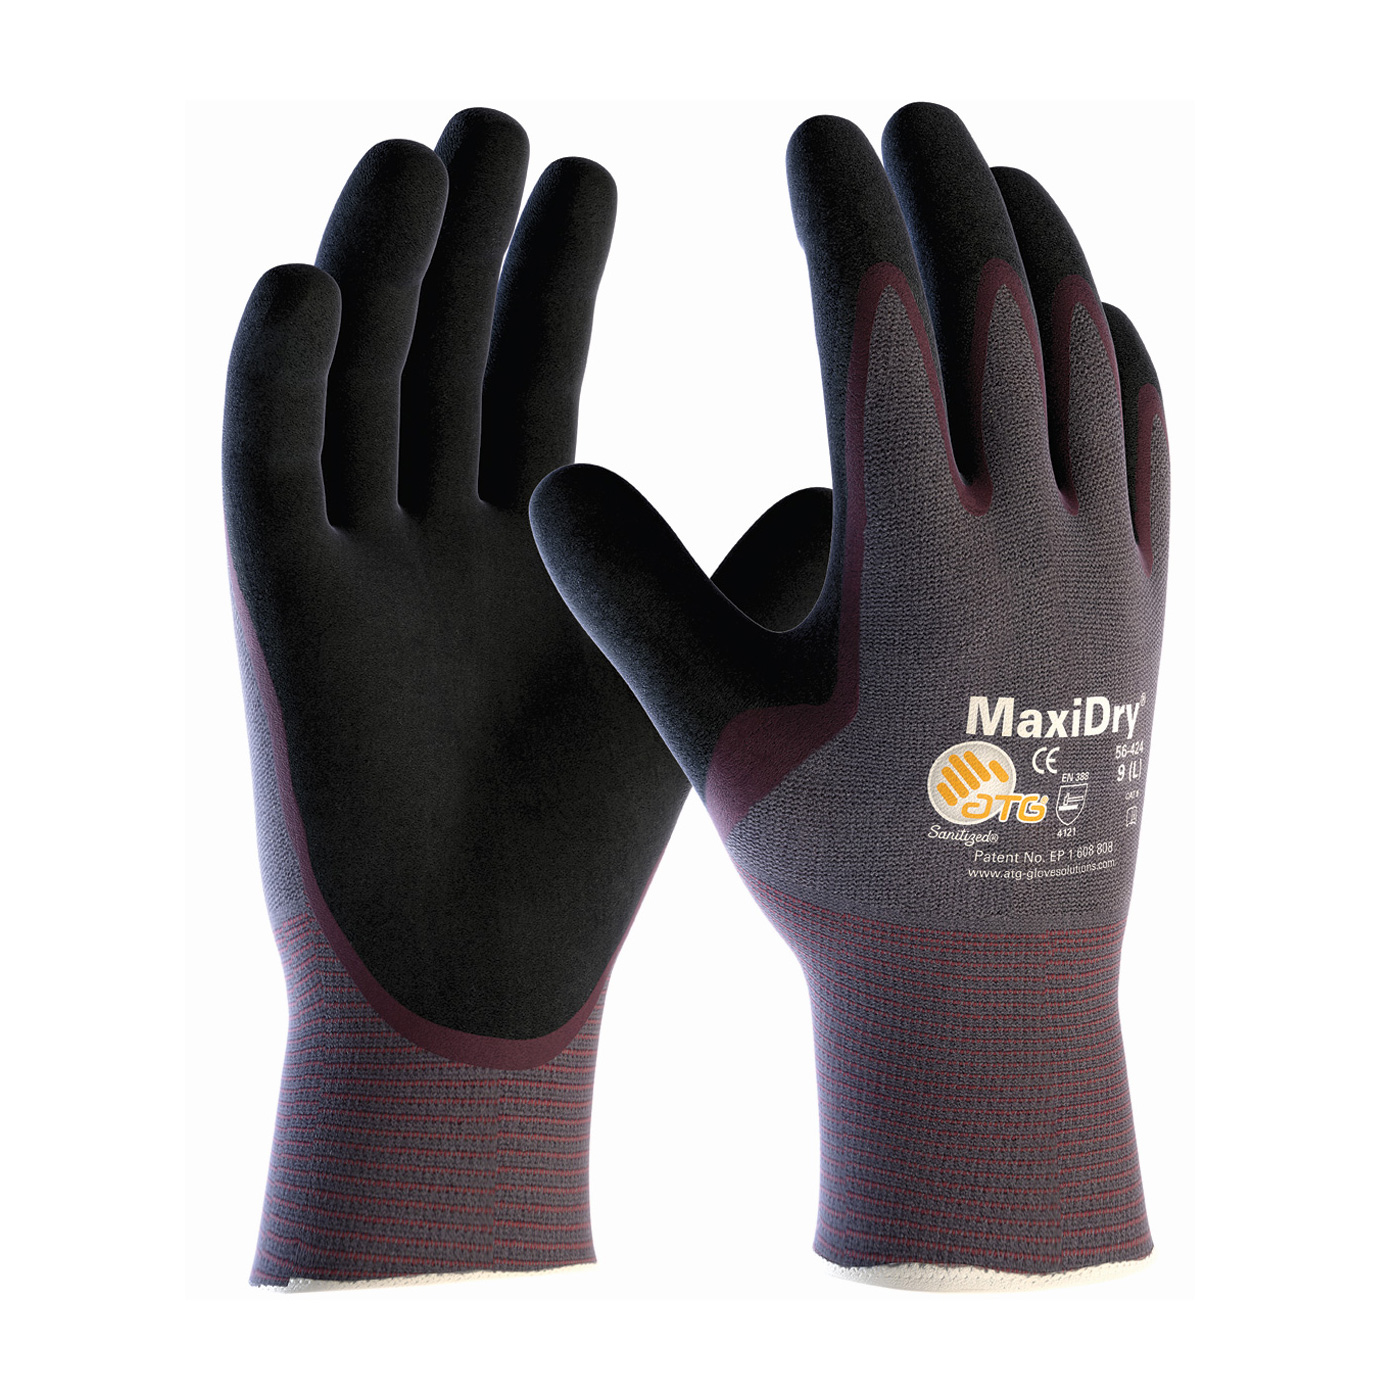 PIP 56-424/L MaxiDry Ultra Lightweight Nitrile Glove, Palm Dipped with Seamless Knit Nylon/Lycra Liner and Non-Slip Grip on Palm & Fingers - Large PID-56424L